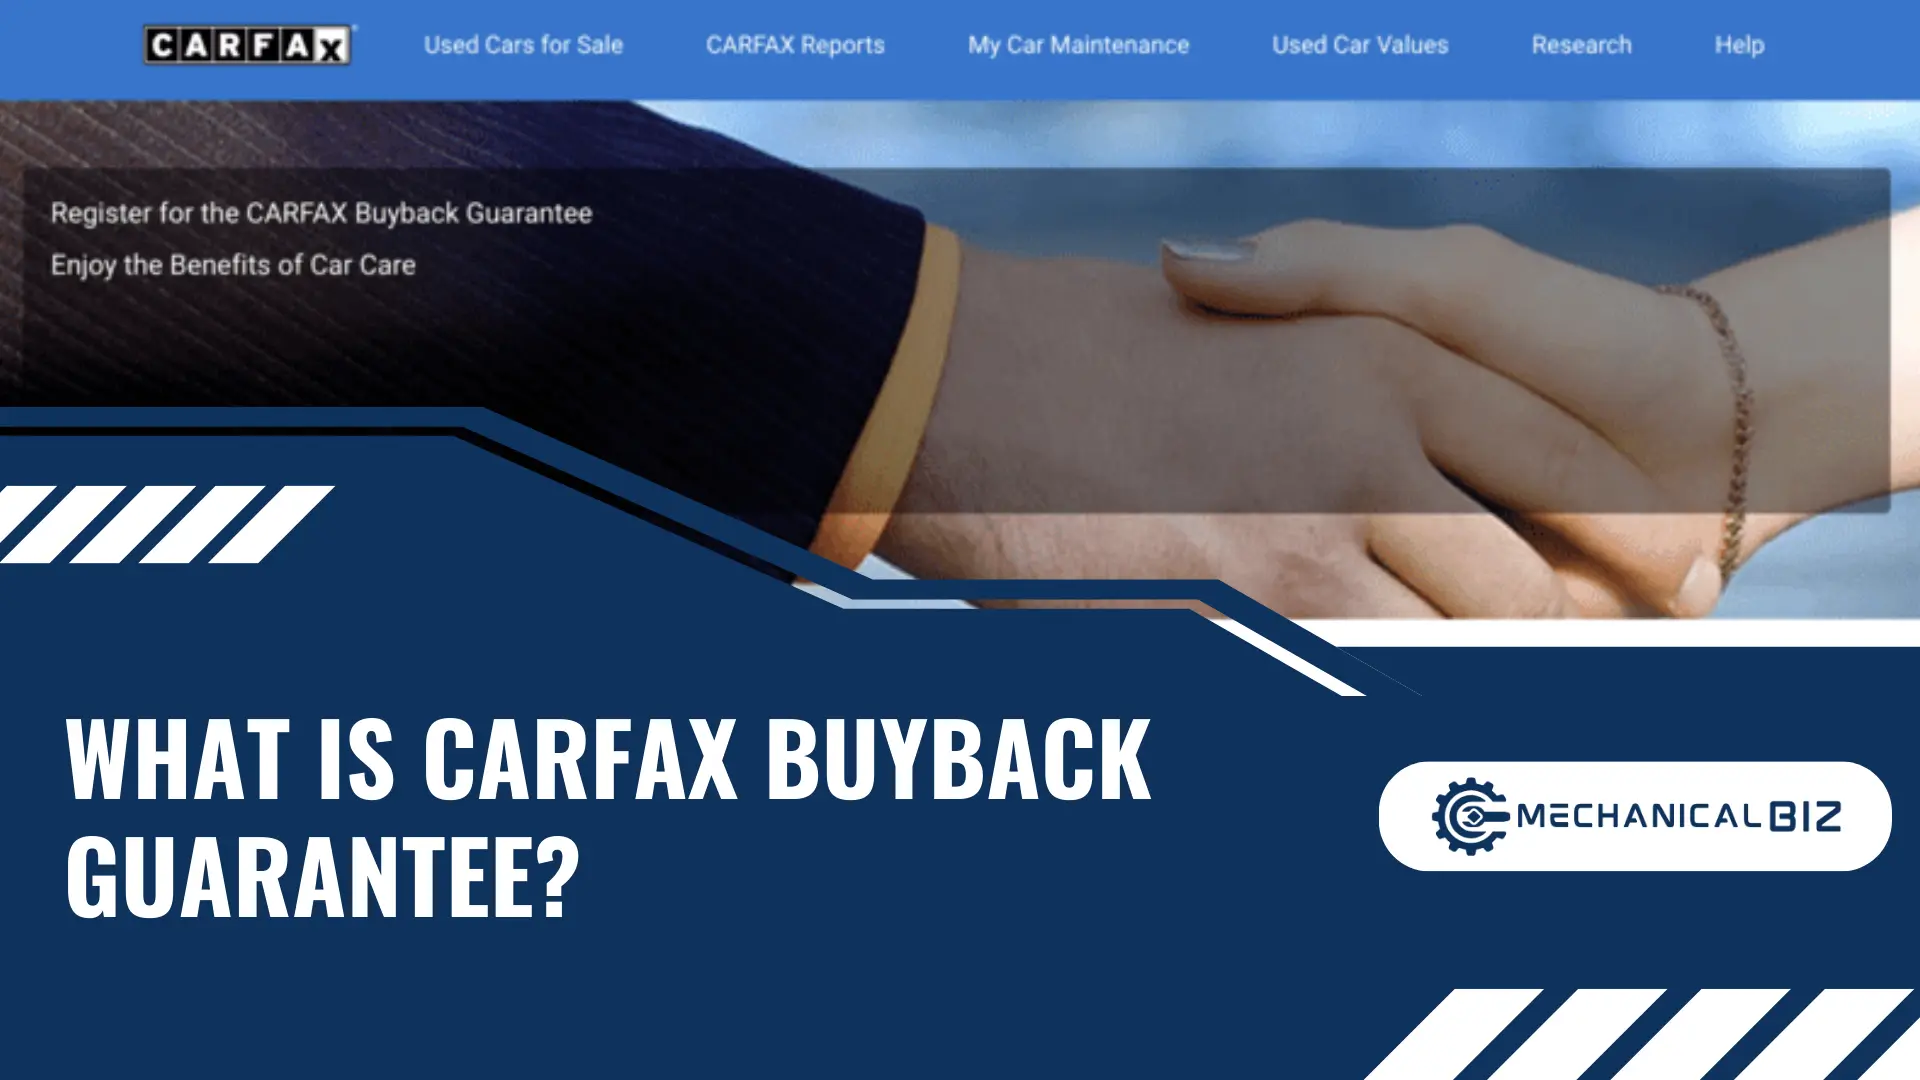 What is Carfax Buyback Guarantee